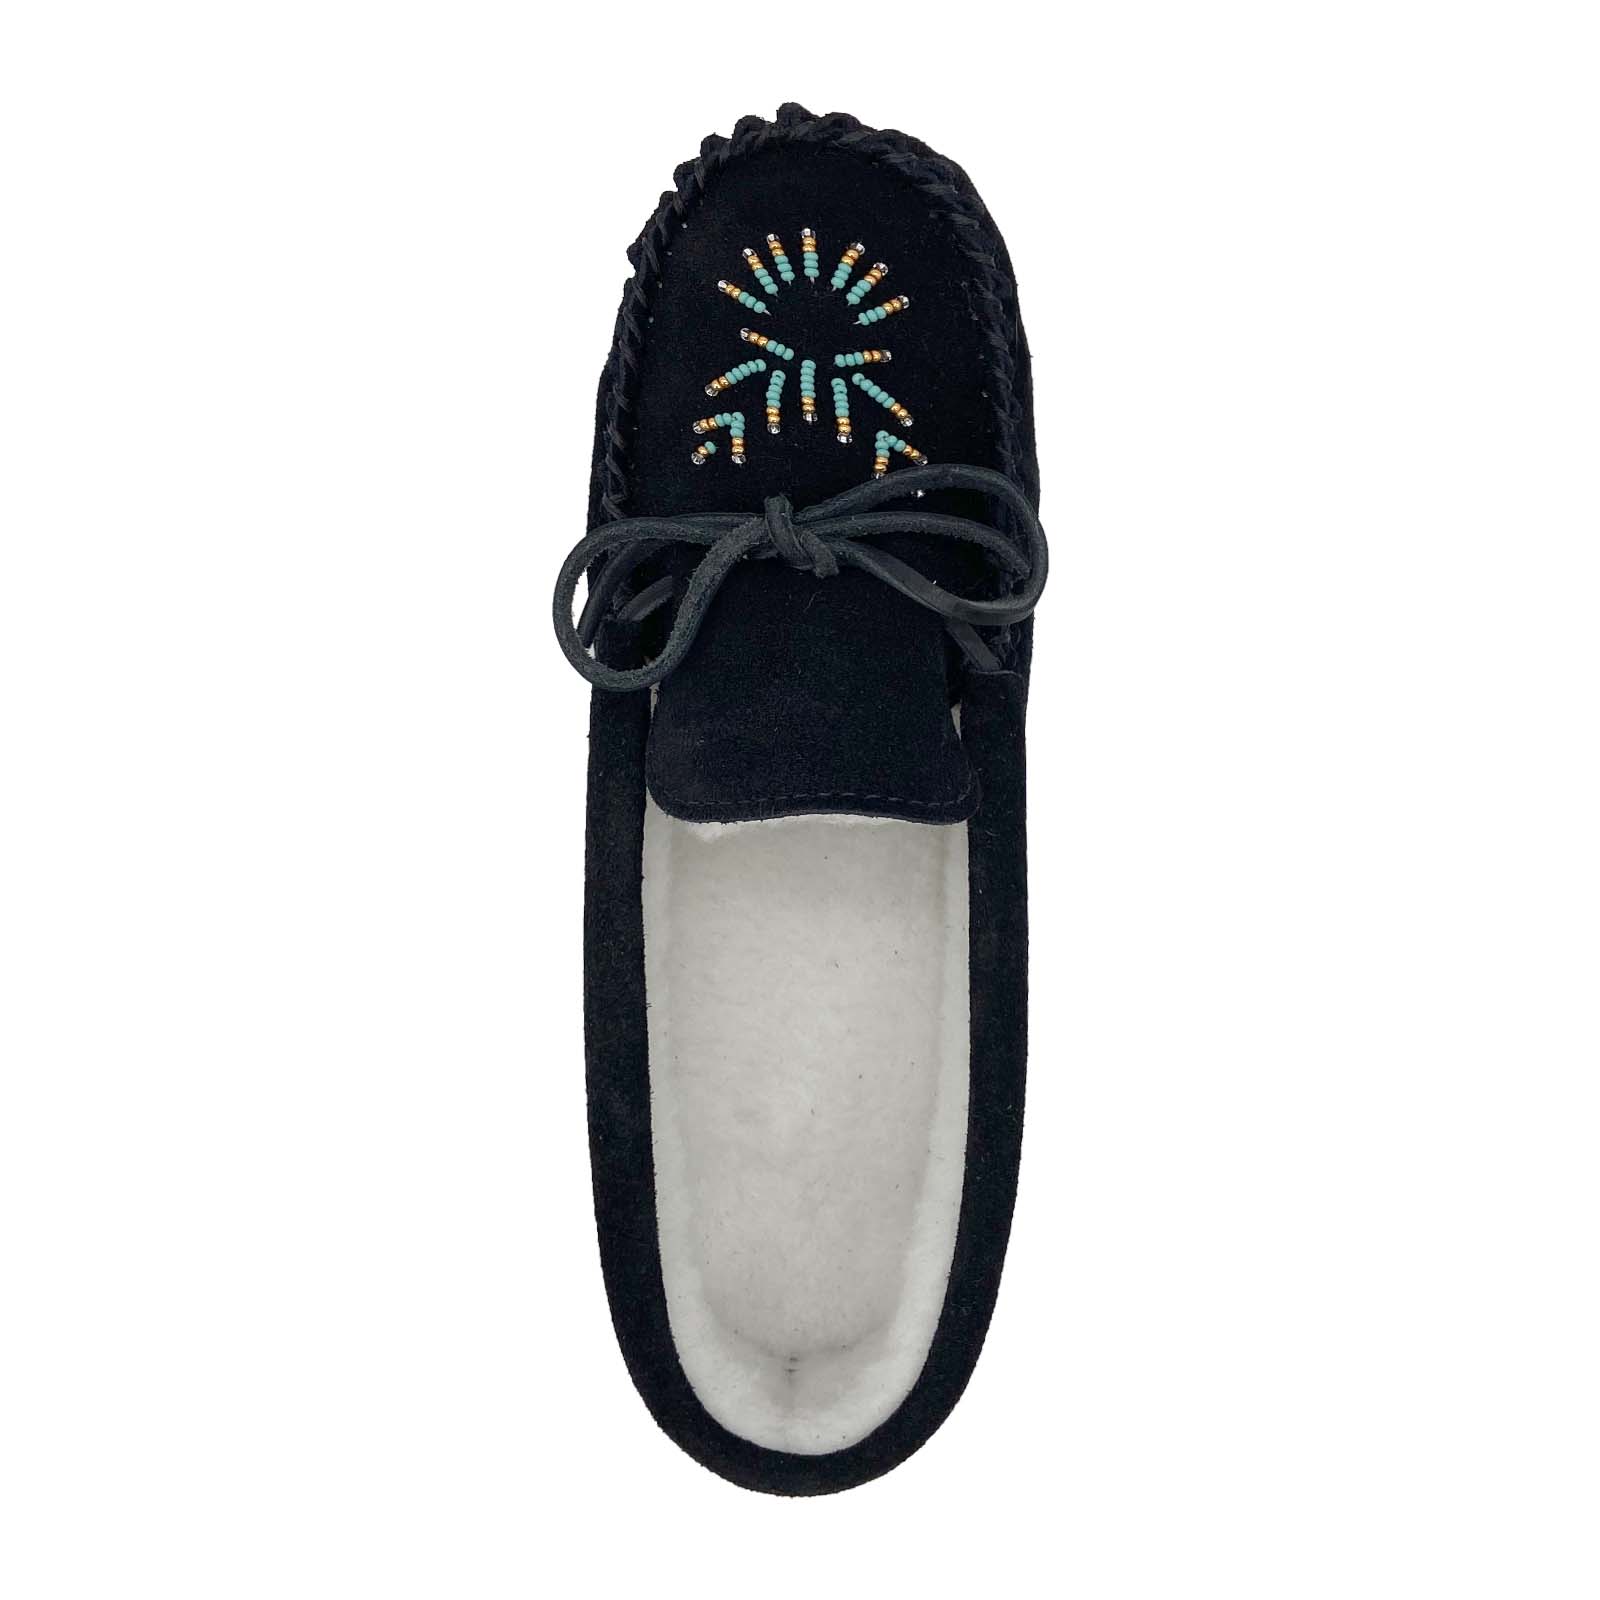 Women's Lined Beaded Suede Moccasins